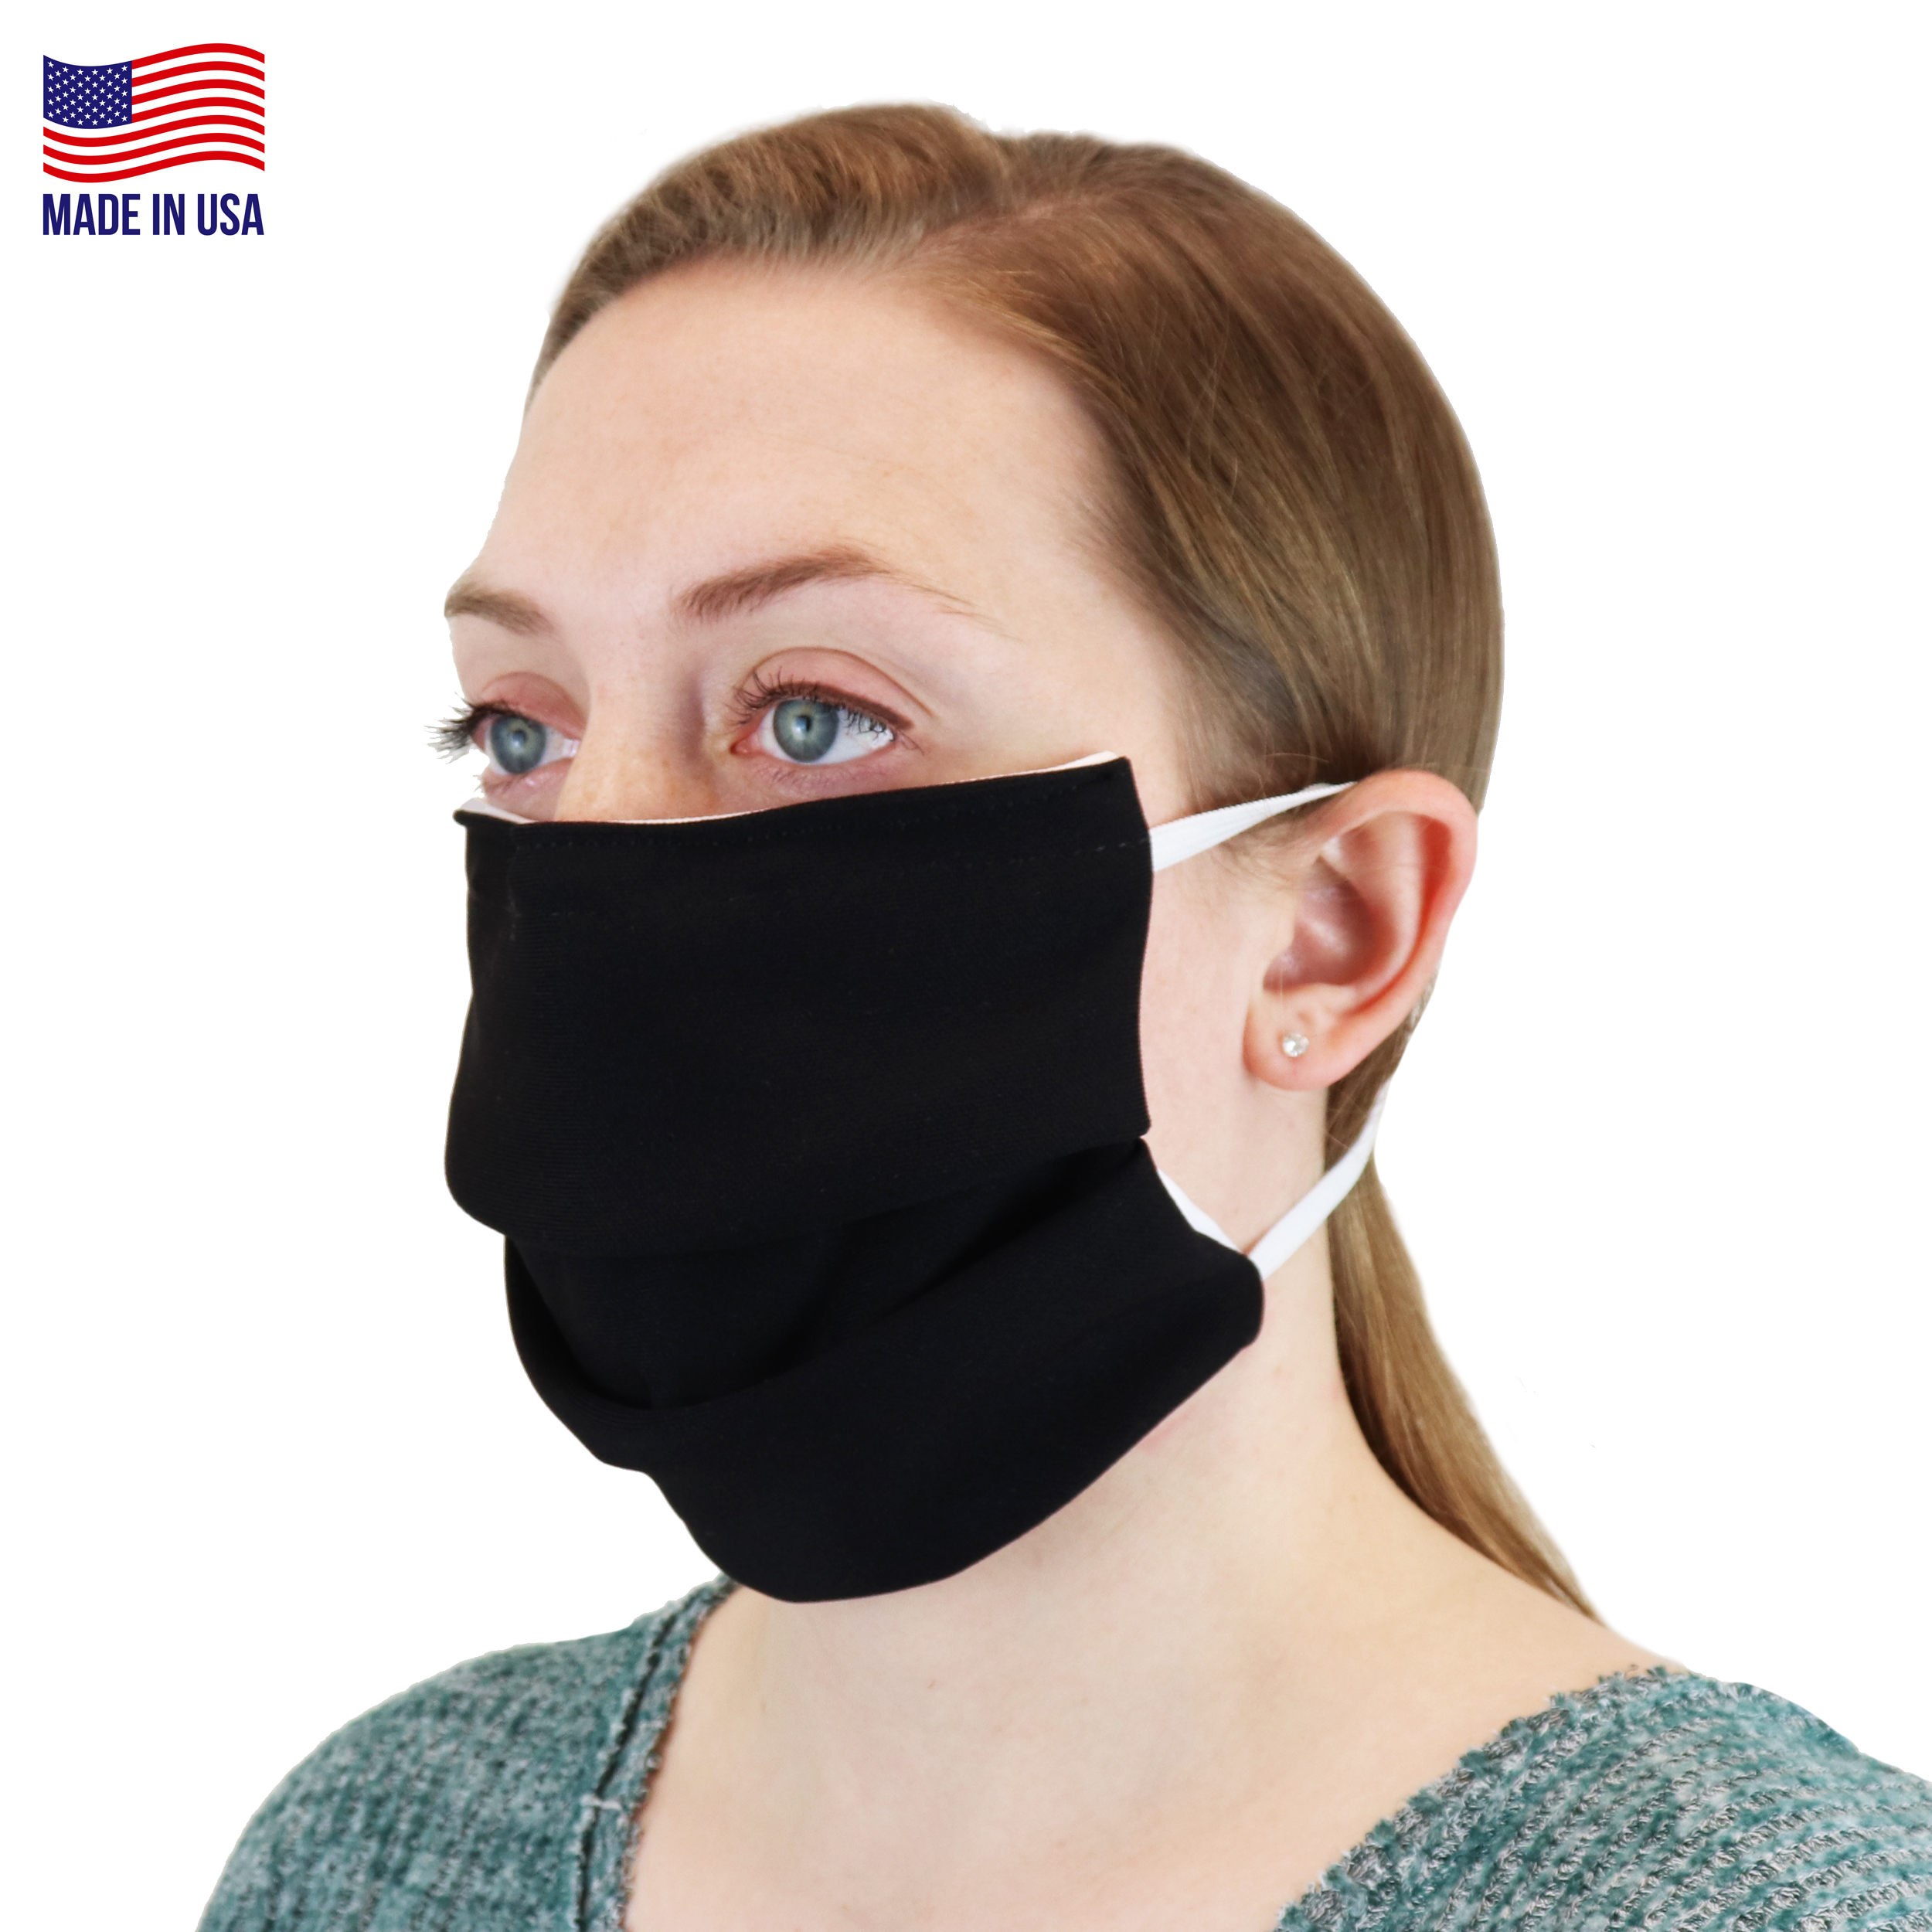 PahaQue Personal Protective Facemask Black